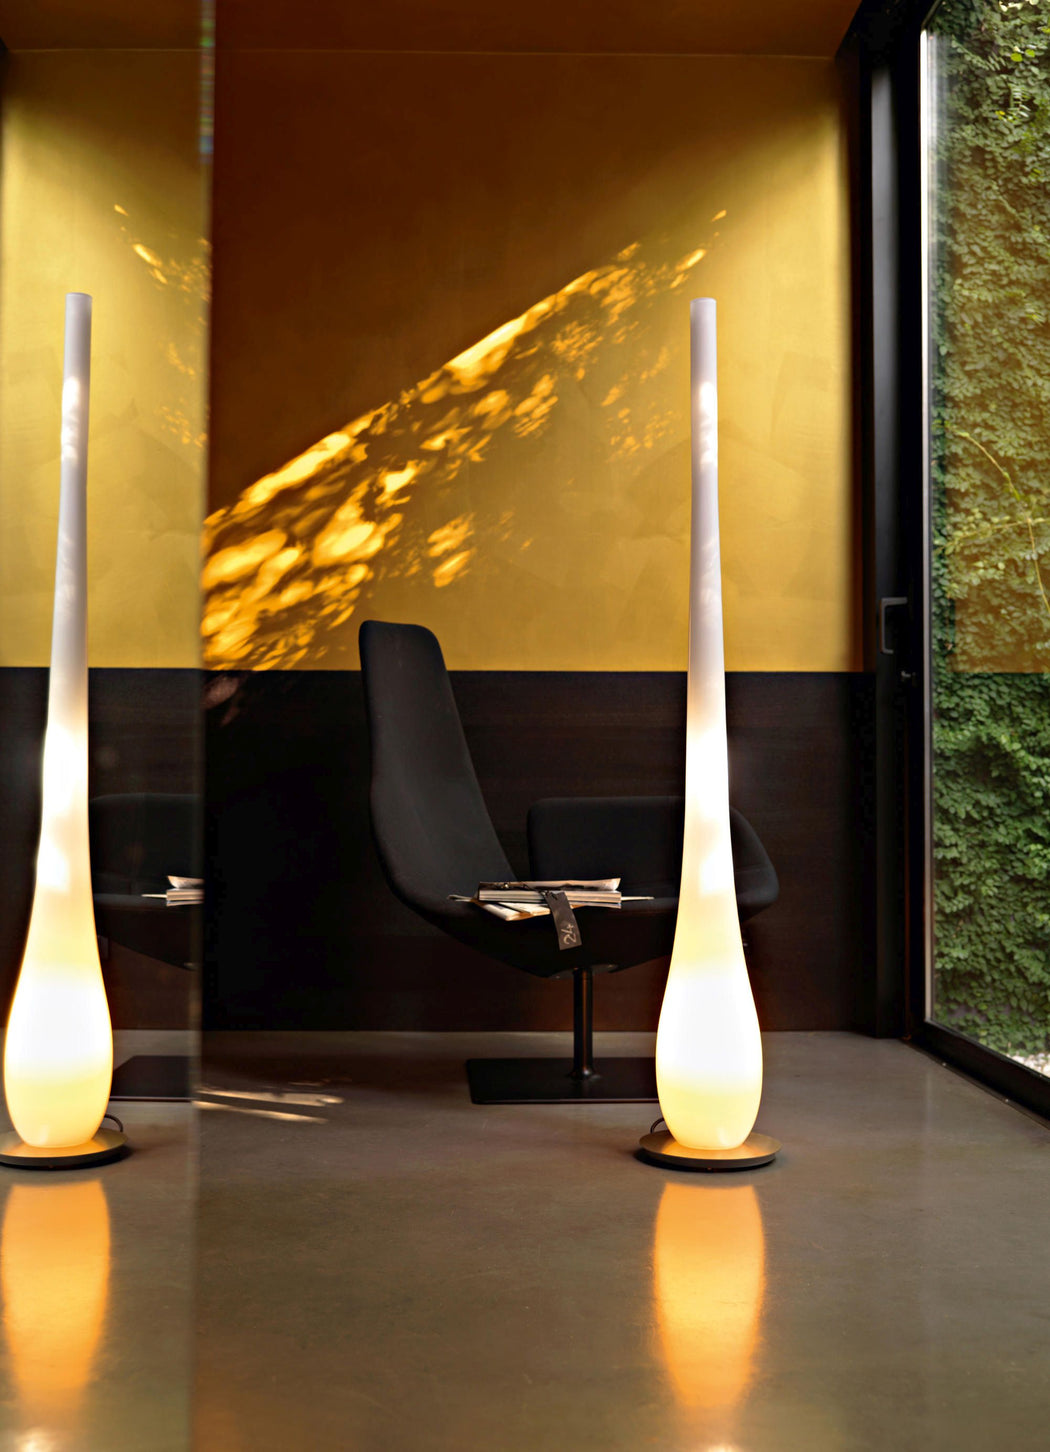 tall contemporary floor lamps